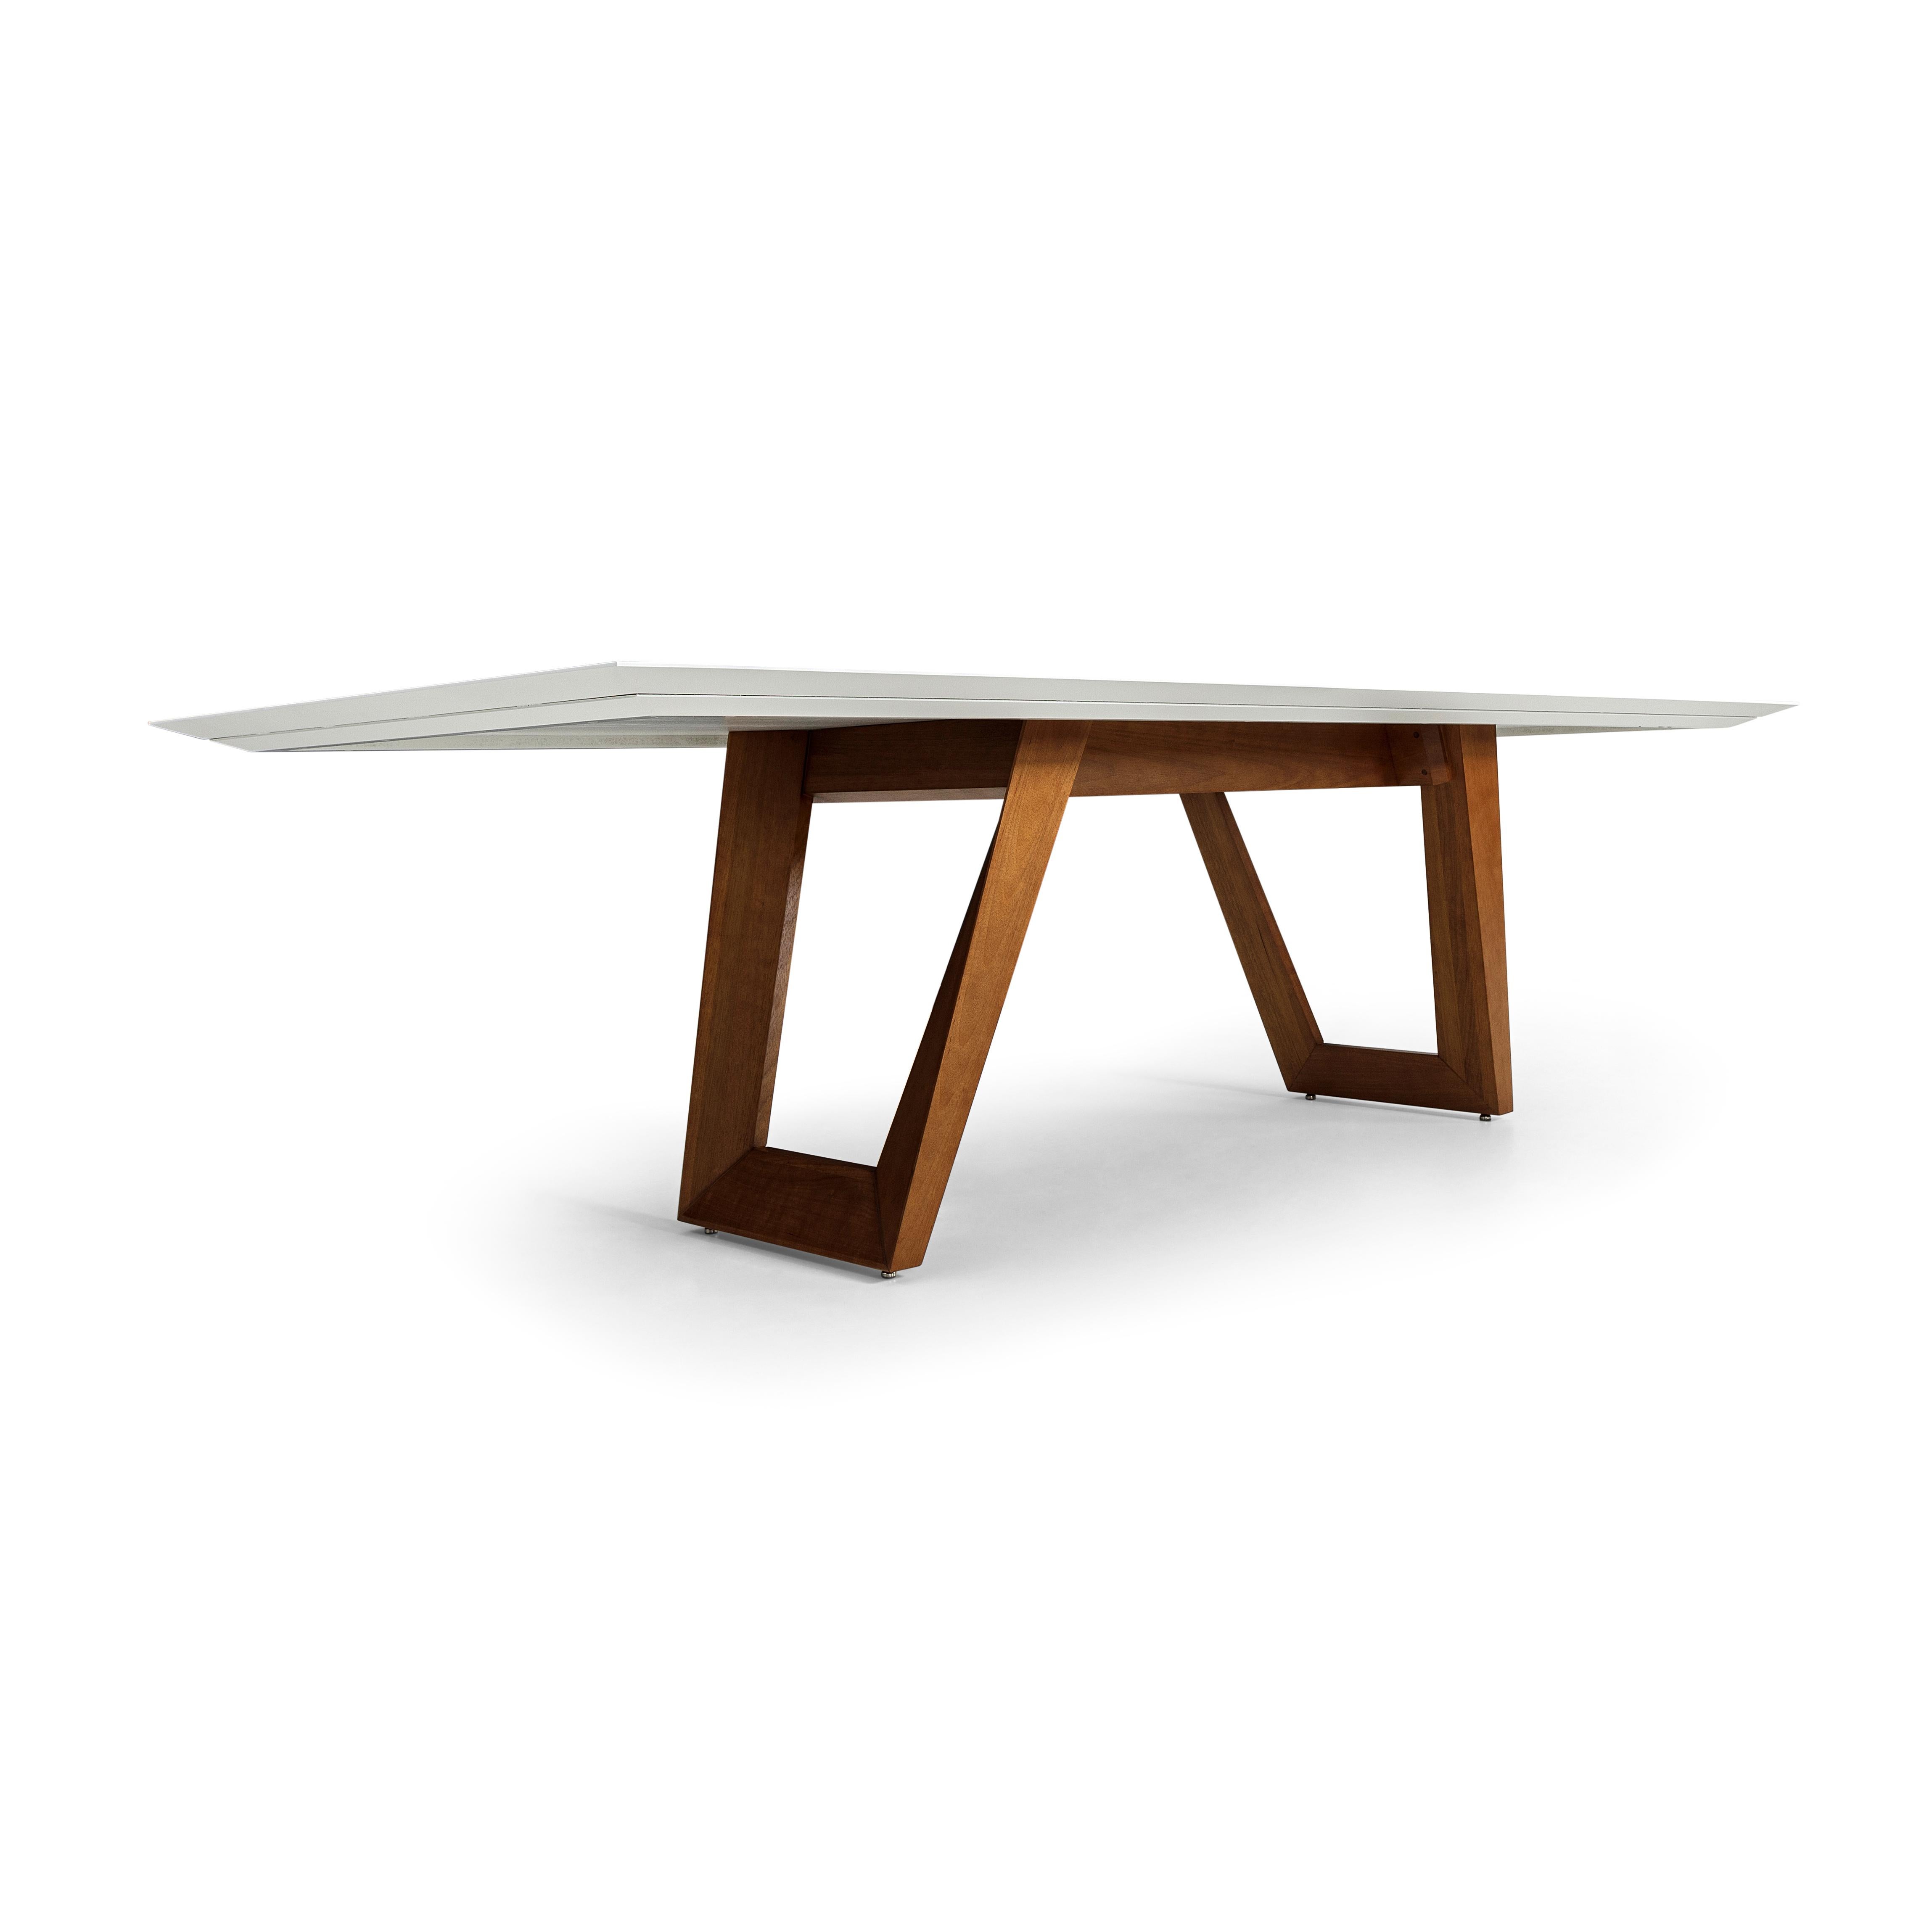 Brazilian Letto Dining Table with Chamfered White Oak Veneered Top and Oak Solid Wood Base